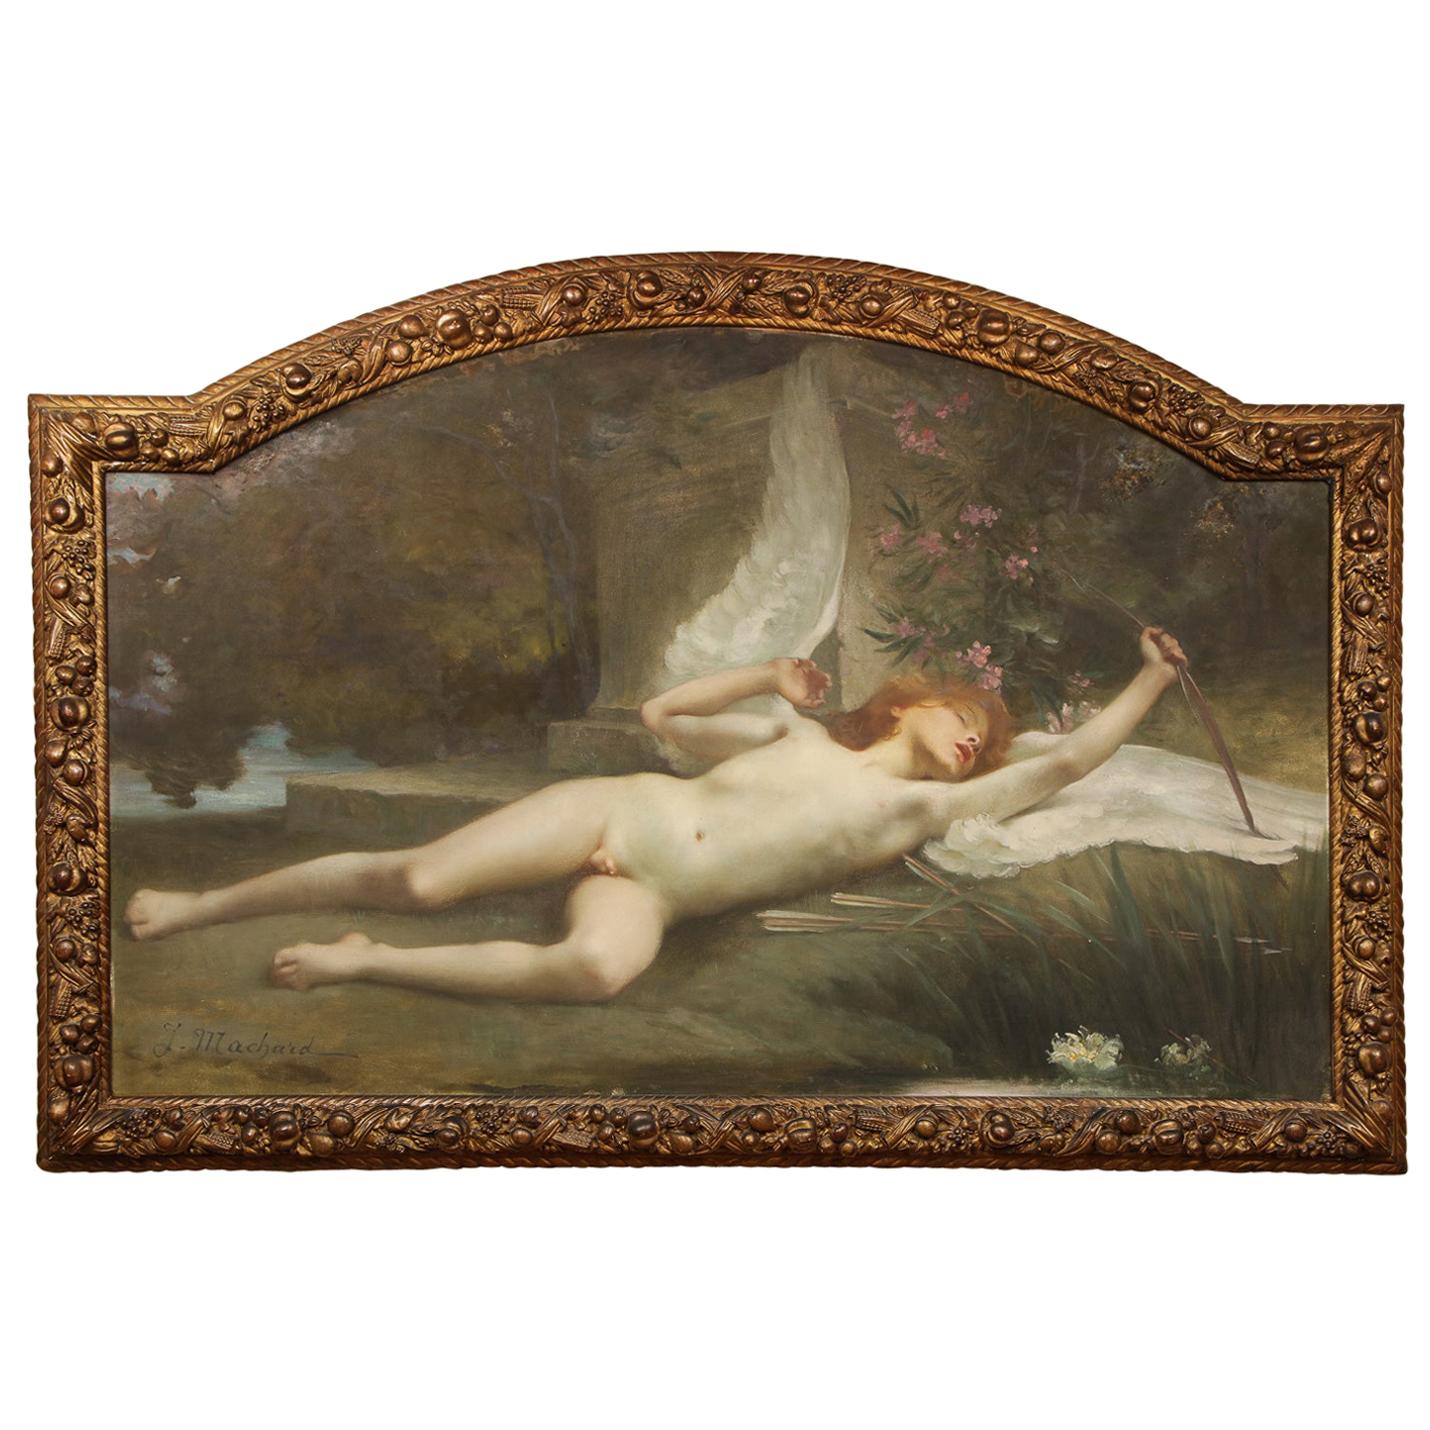 Jules-Louis Machard "Dream of Eros" Exceptional Oil Painting